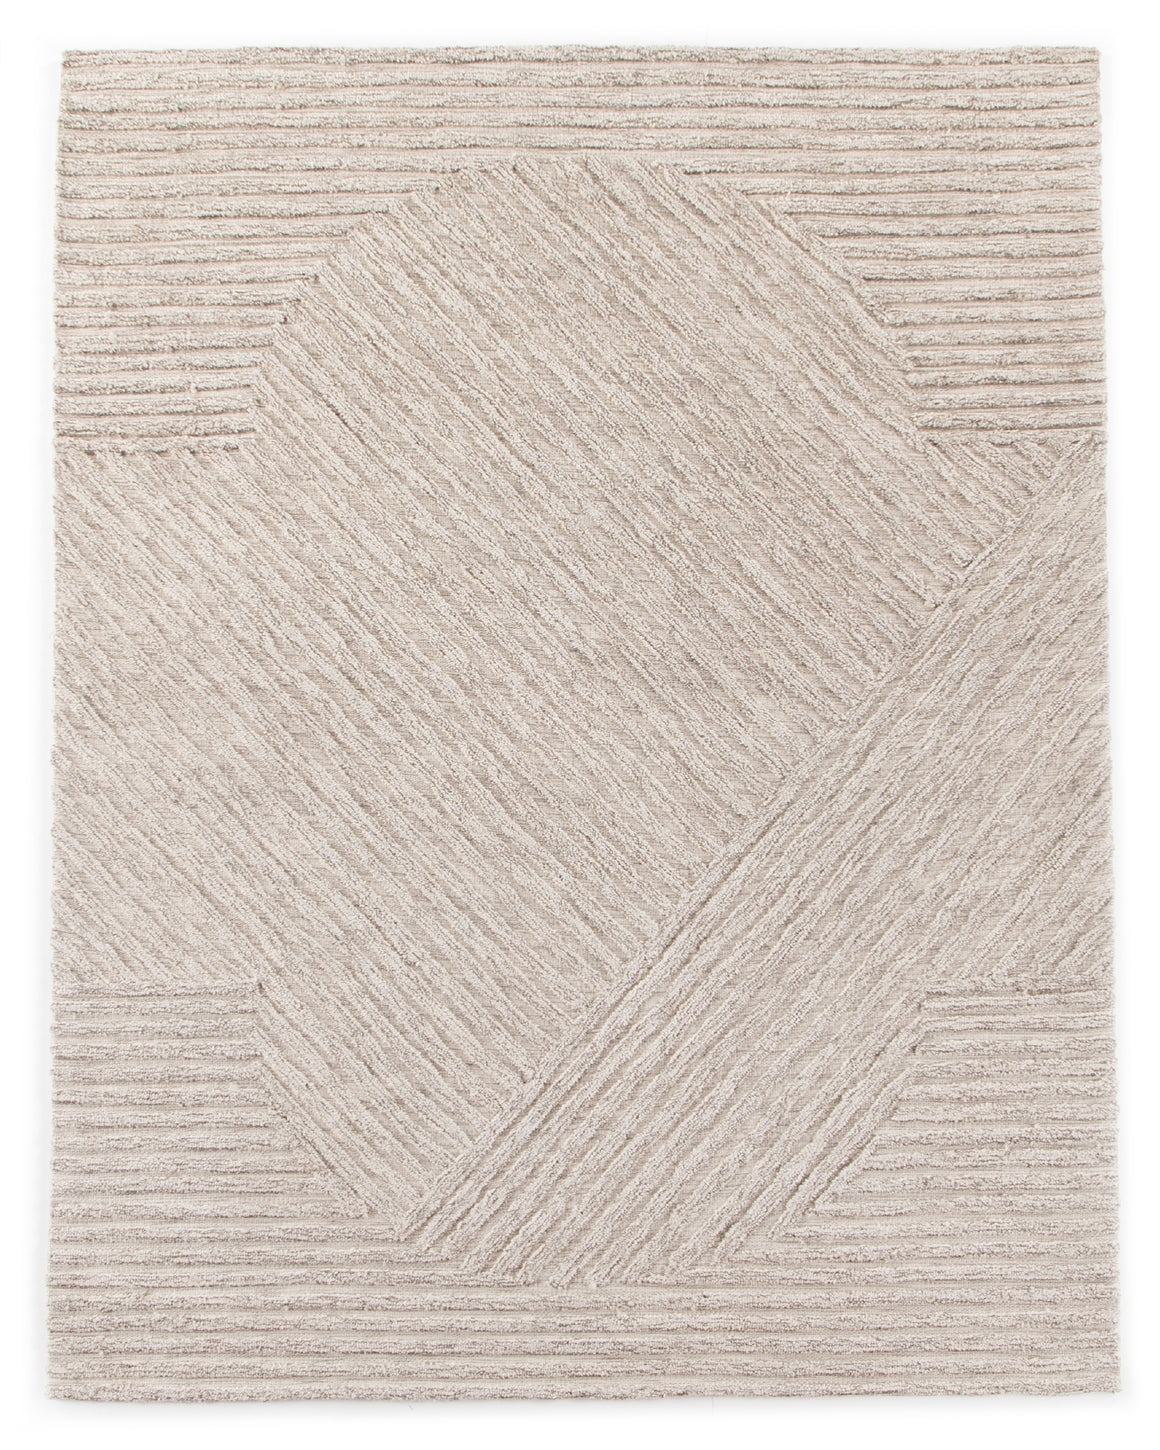 Nomad - Chasen Outdoor Rug-Heathered-9x12'